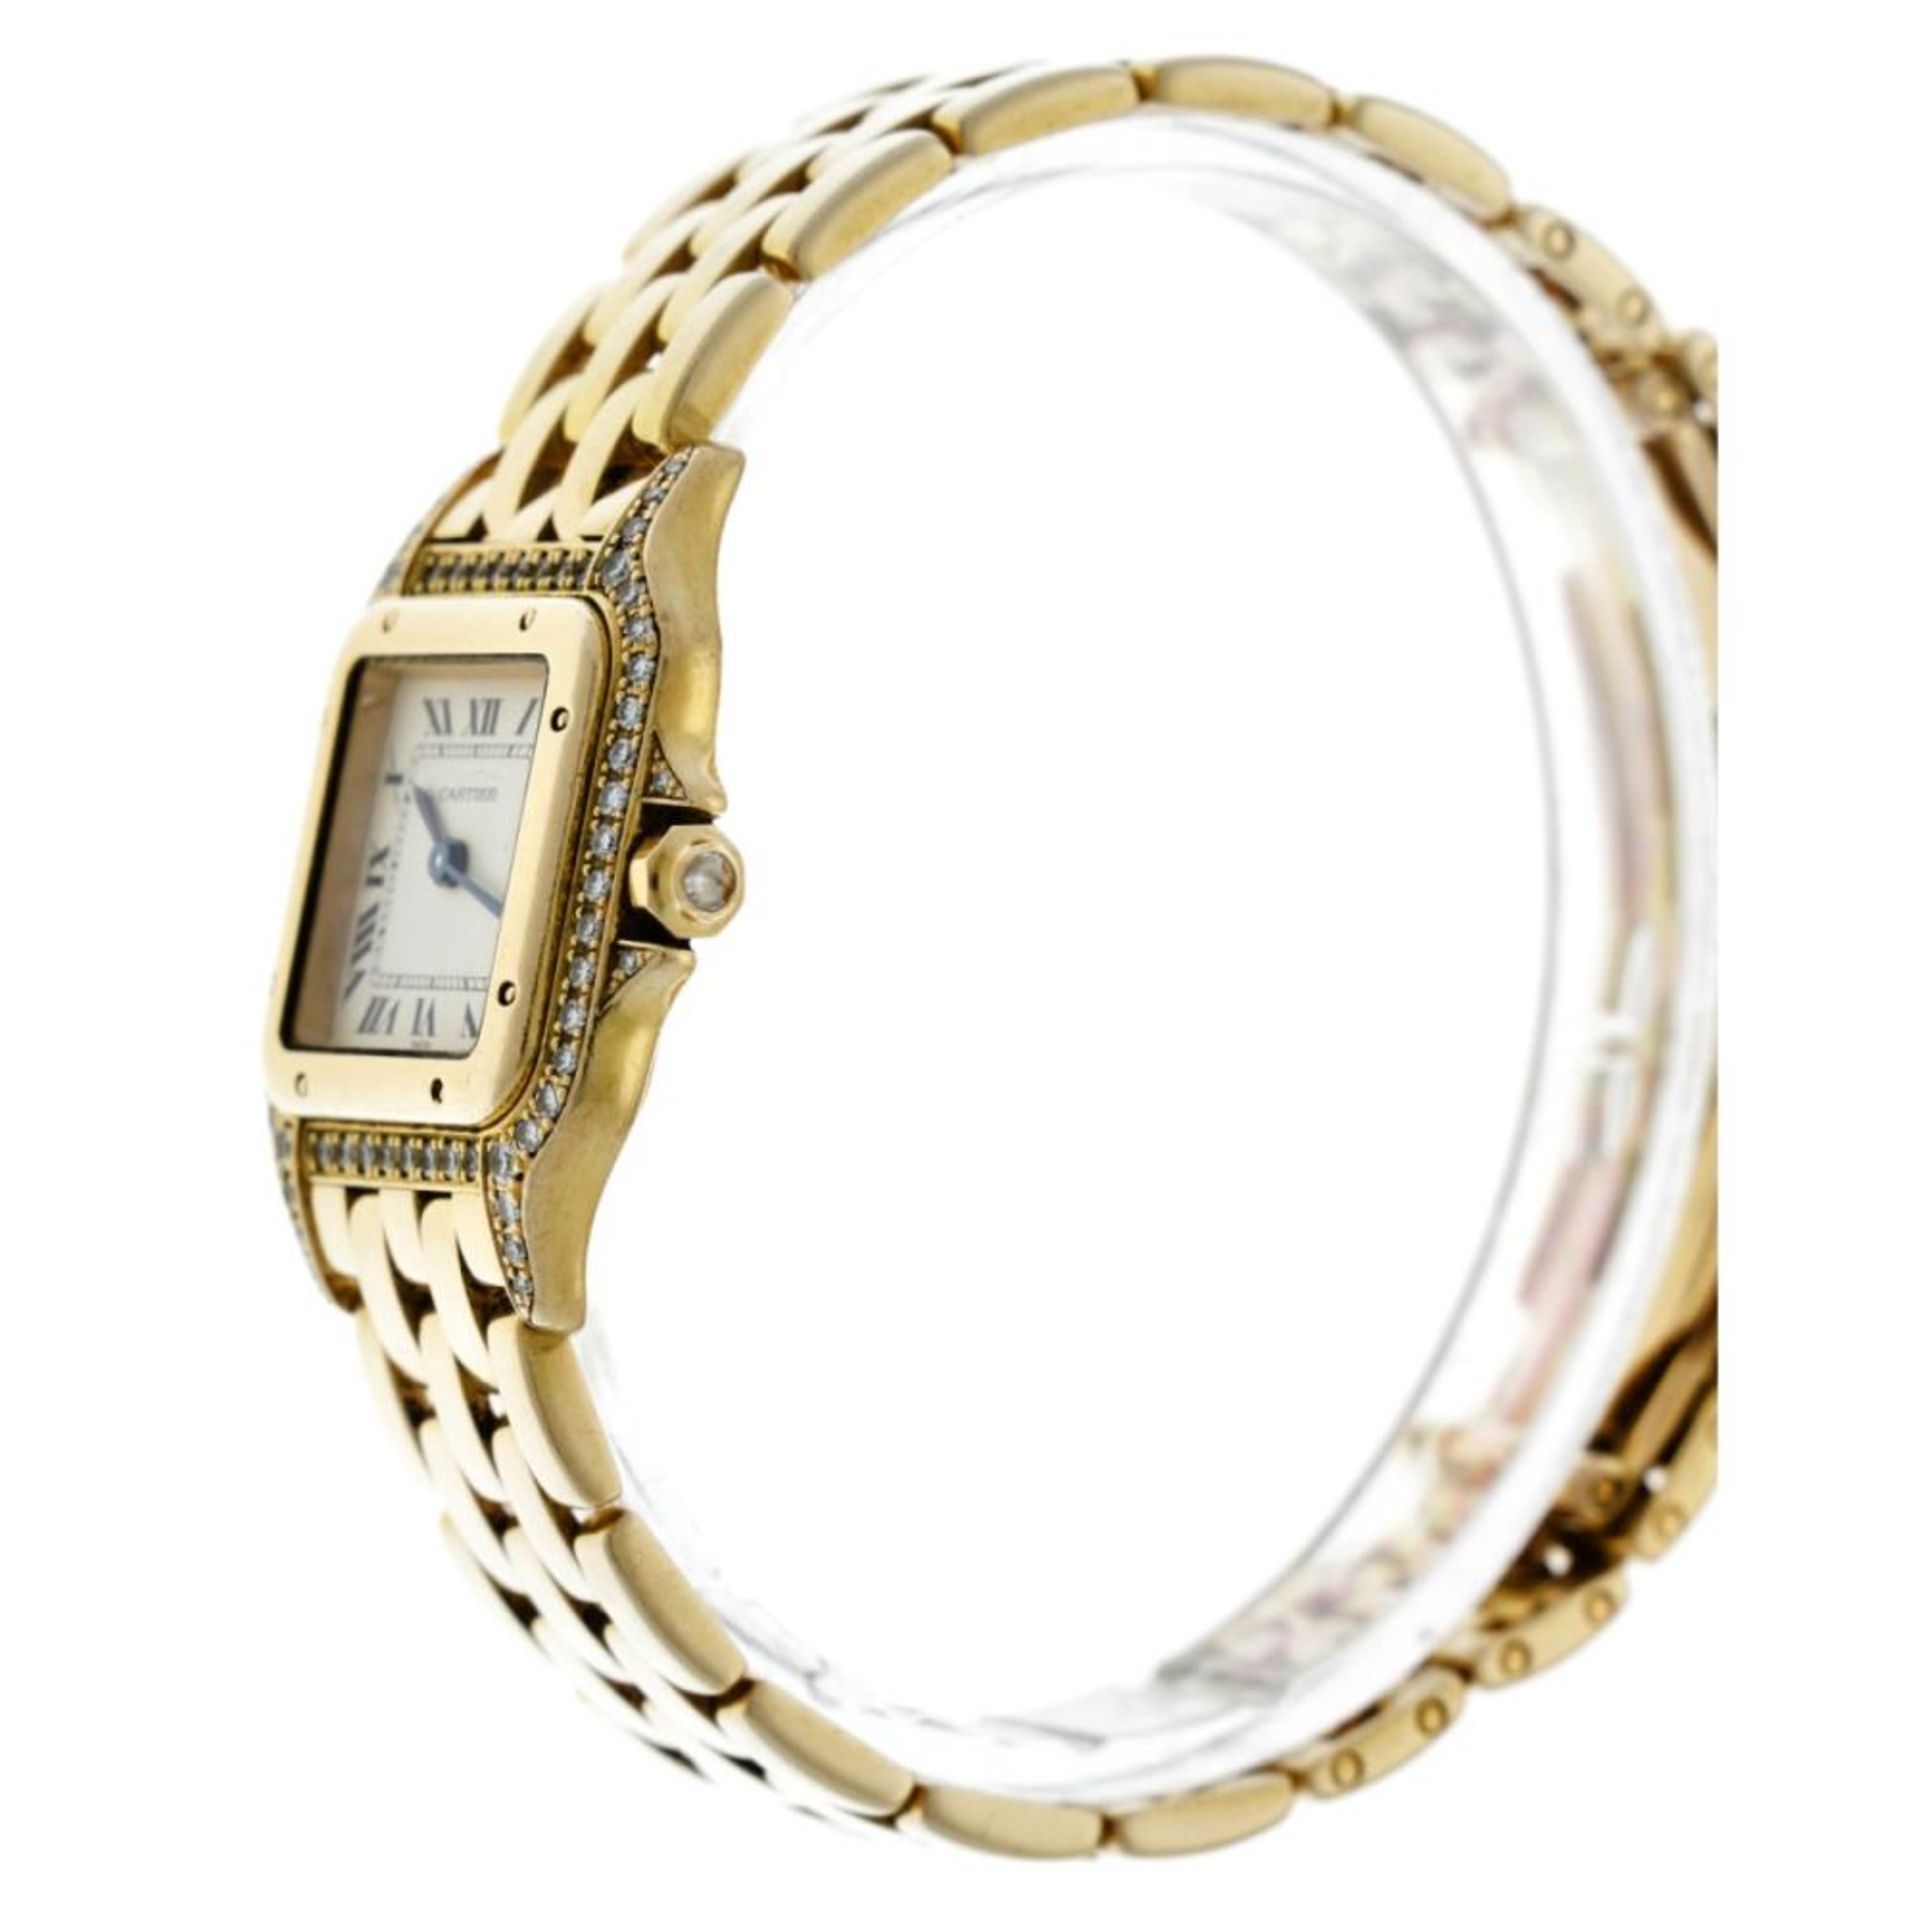 Cartier Panthere 1280 - Ladies watch - approx. 1995. - Image 9 of 10